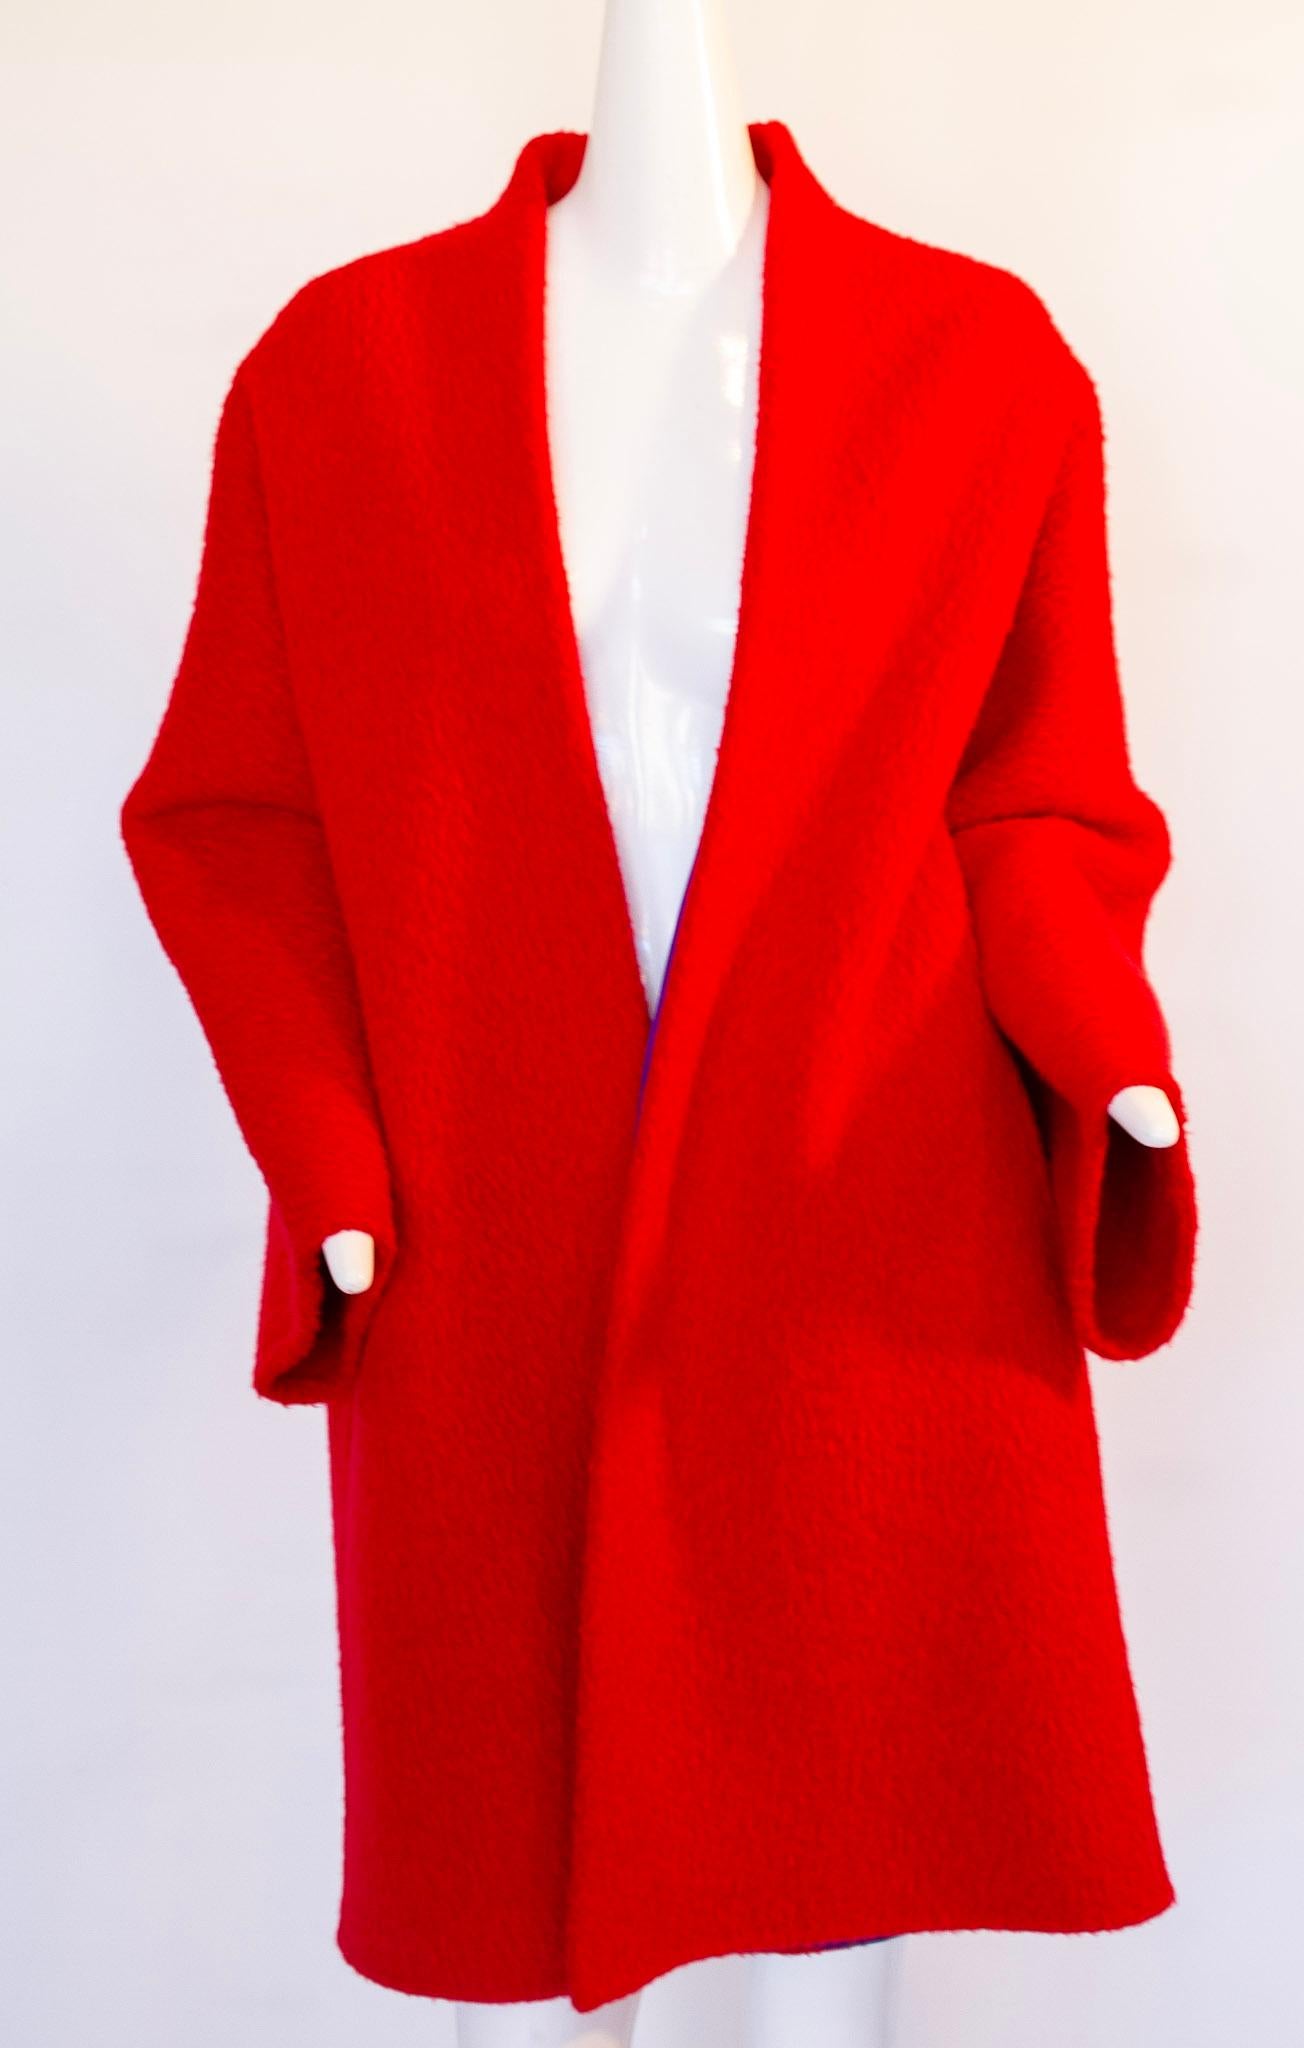 Gianfranco Ferre, Red, Wool and Alpaca, Cocoon Coat, 1978 For Sale